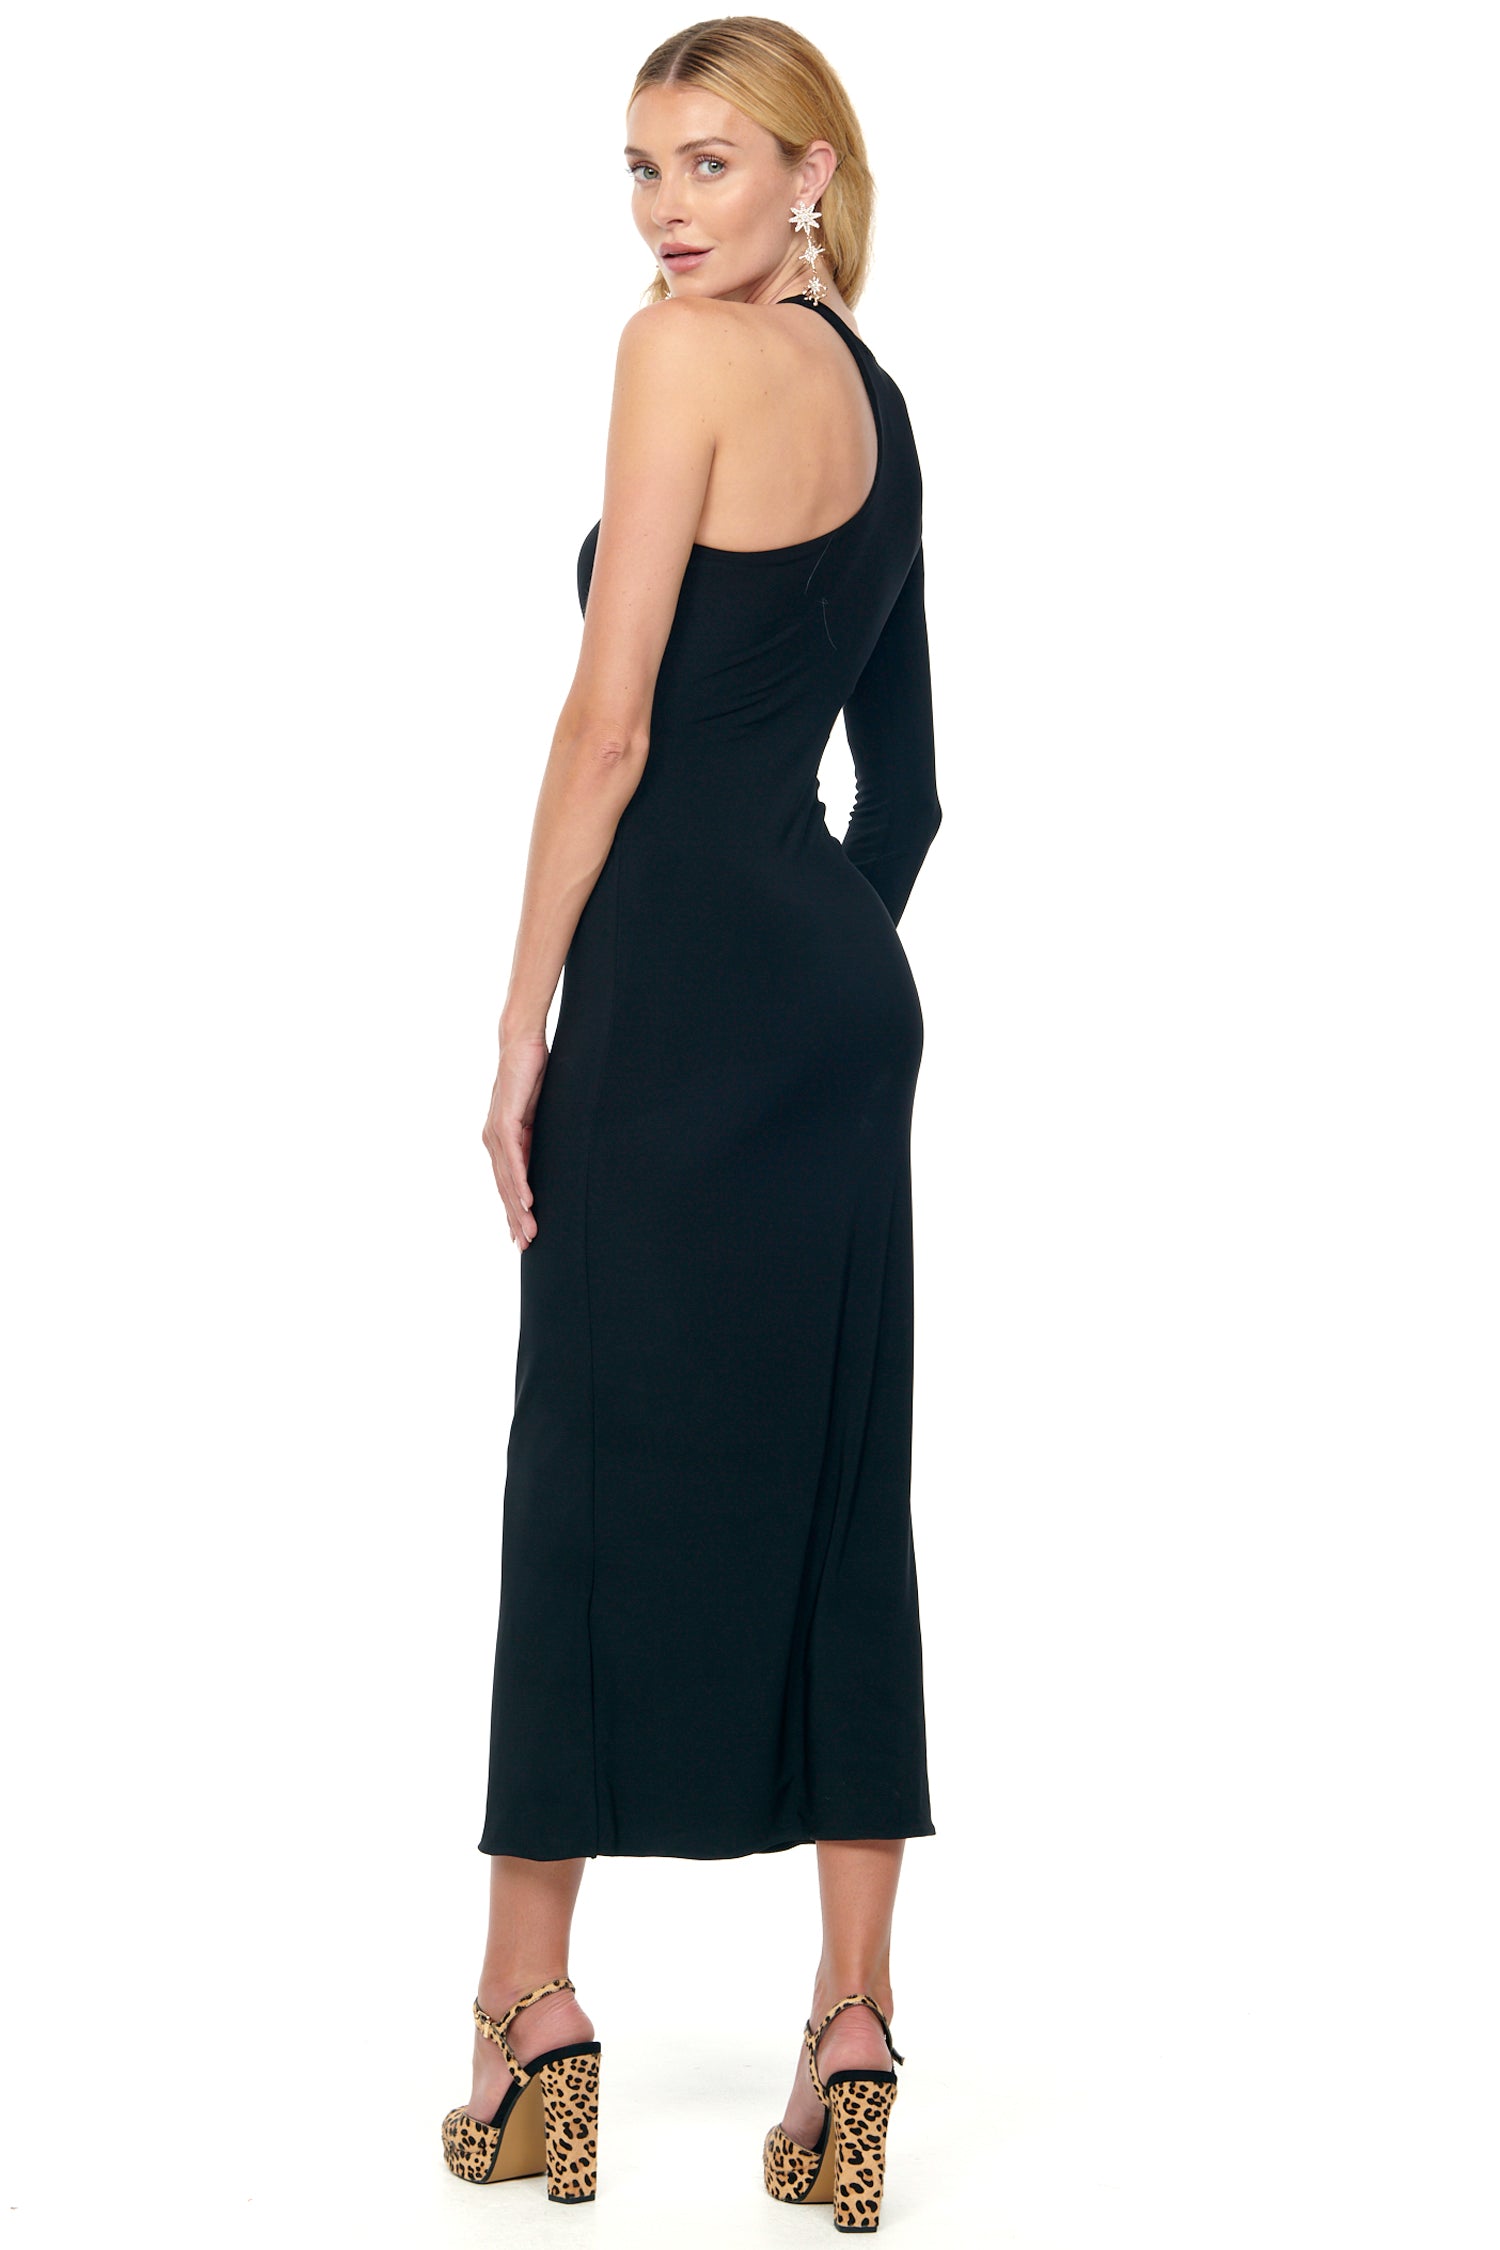 Model wearing Black Midi Gigi Cut Out Dress standing facing away from the camera